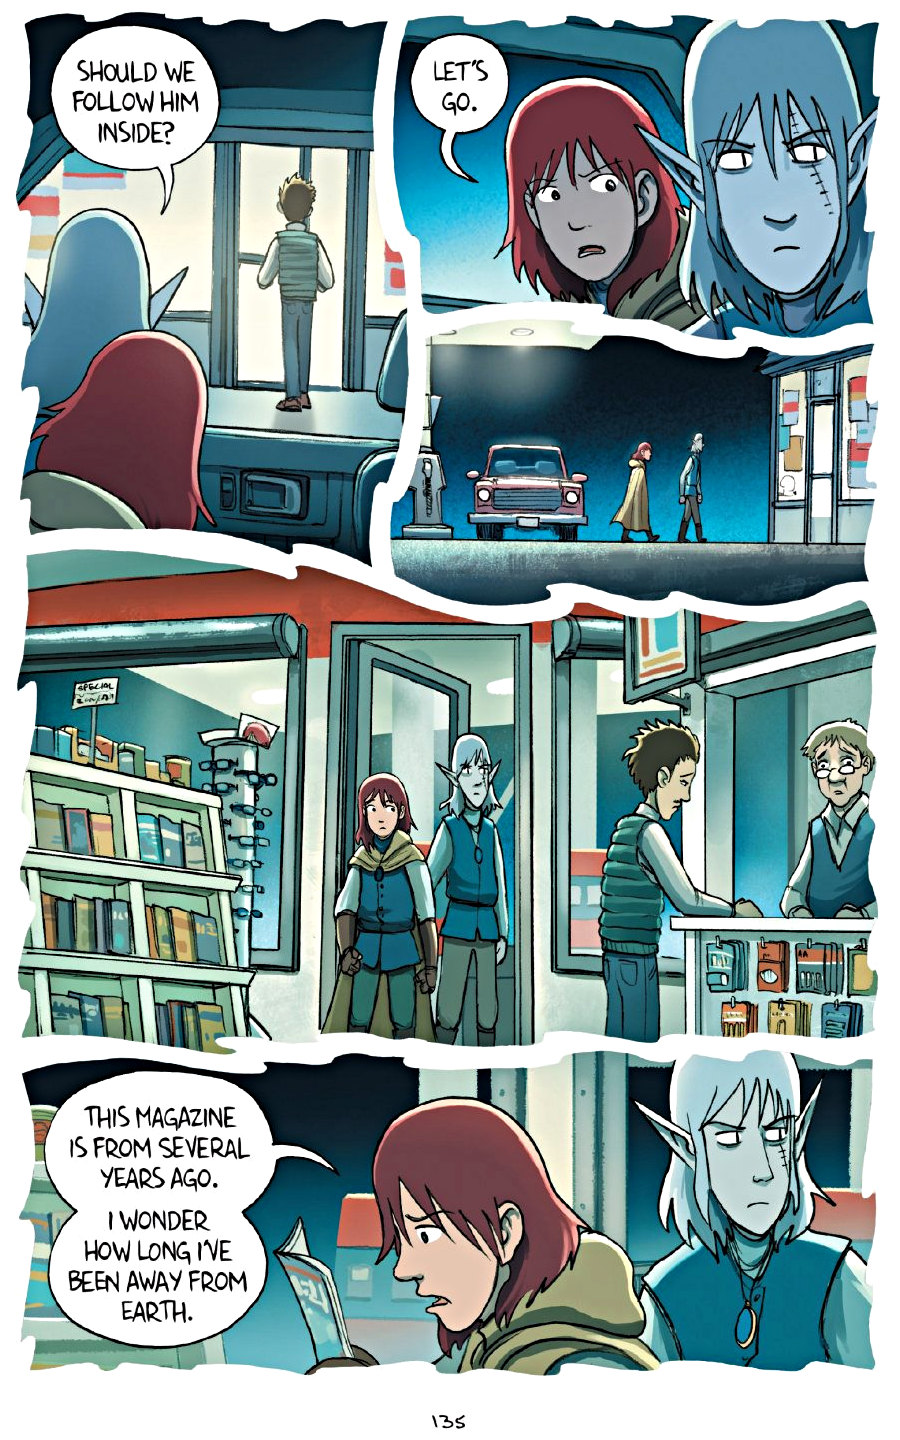 page 135 of amulet 7 firelight graphic novel